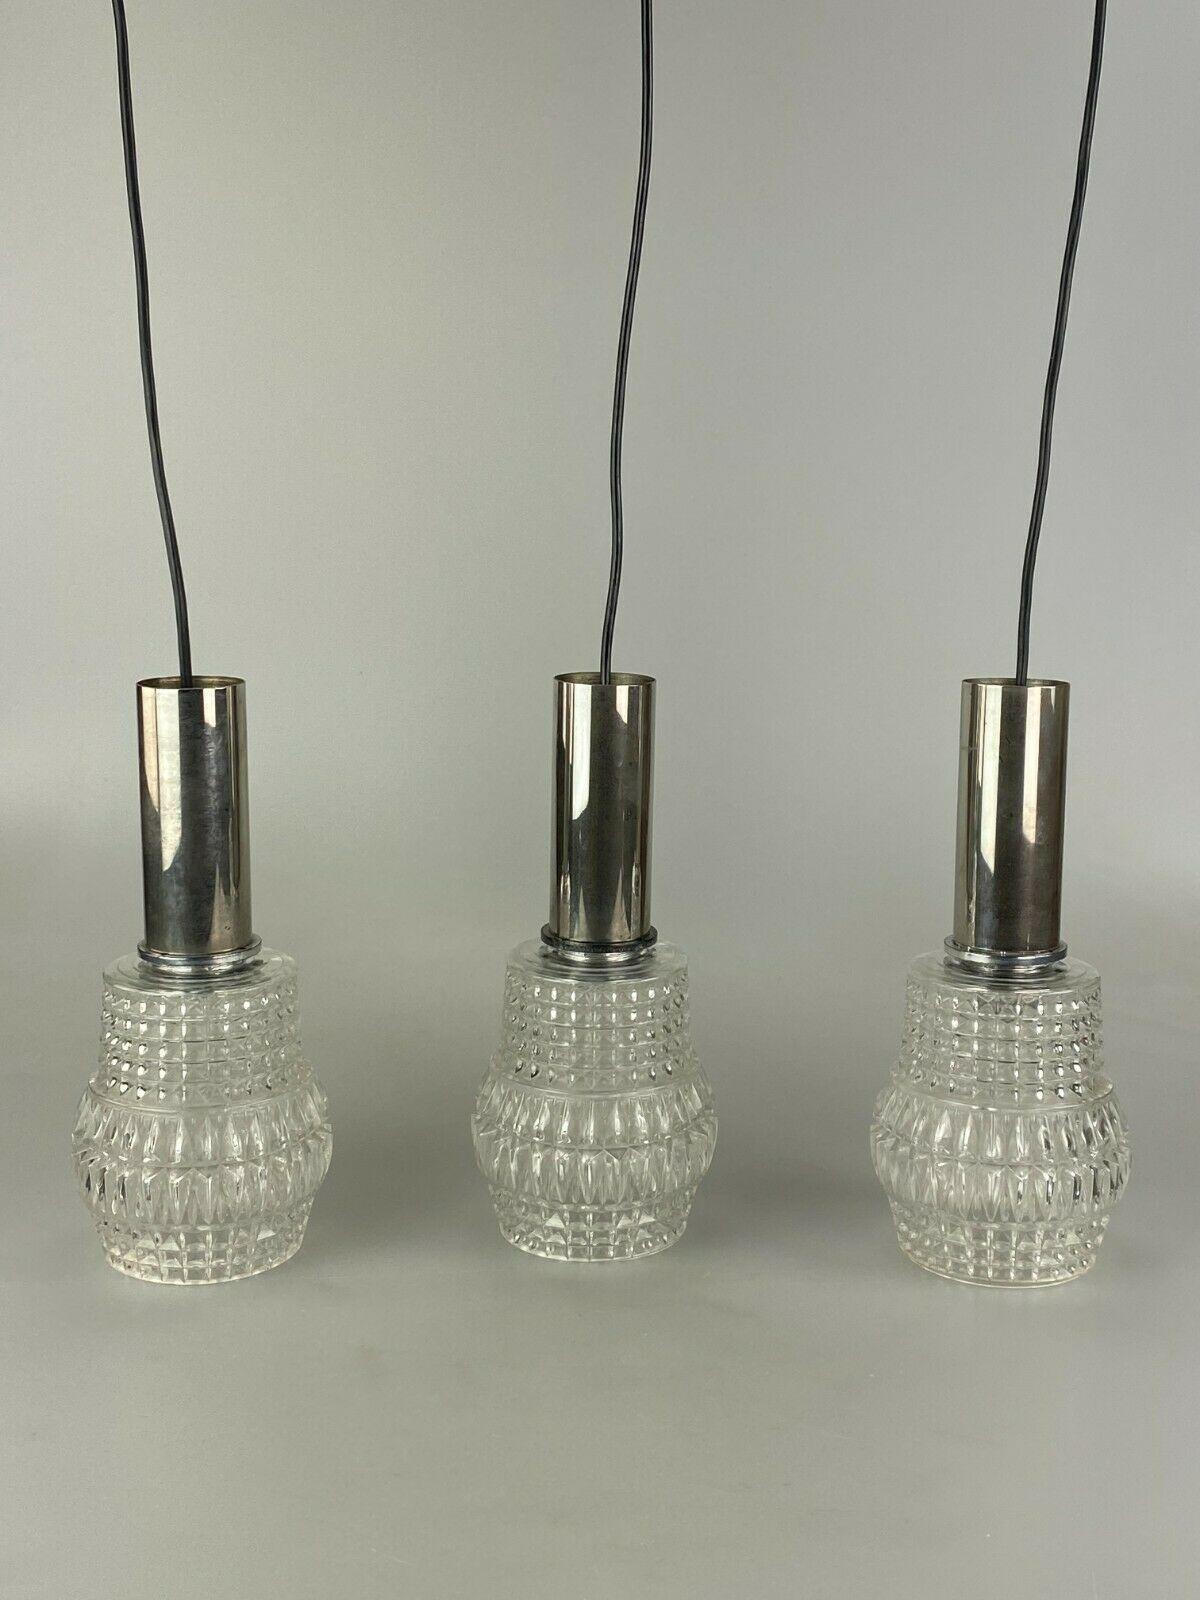 70s ceiling light hanging lamp cascade lamp glass chrome space age design

Object: cascade lamp

Manufacturer:

Condition: good

Age: around 1960-1970

Dimensions:

60cm x 13cm x 90cm

Other notes:

The pictures serve as part of the